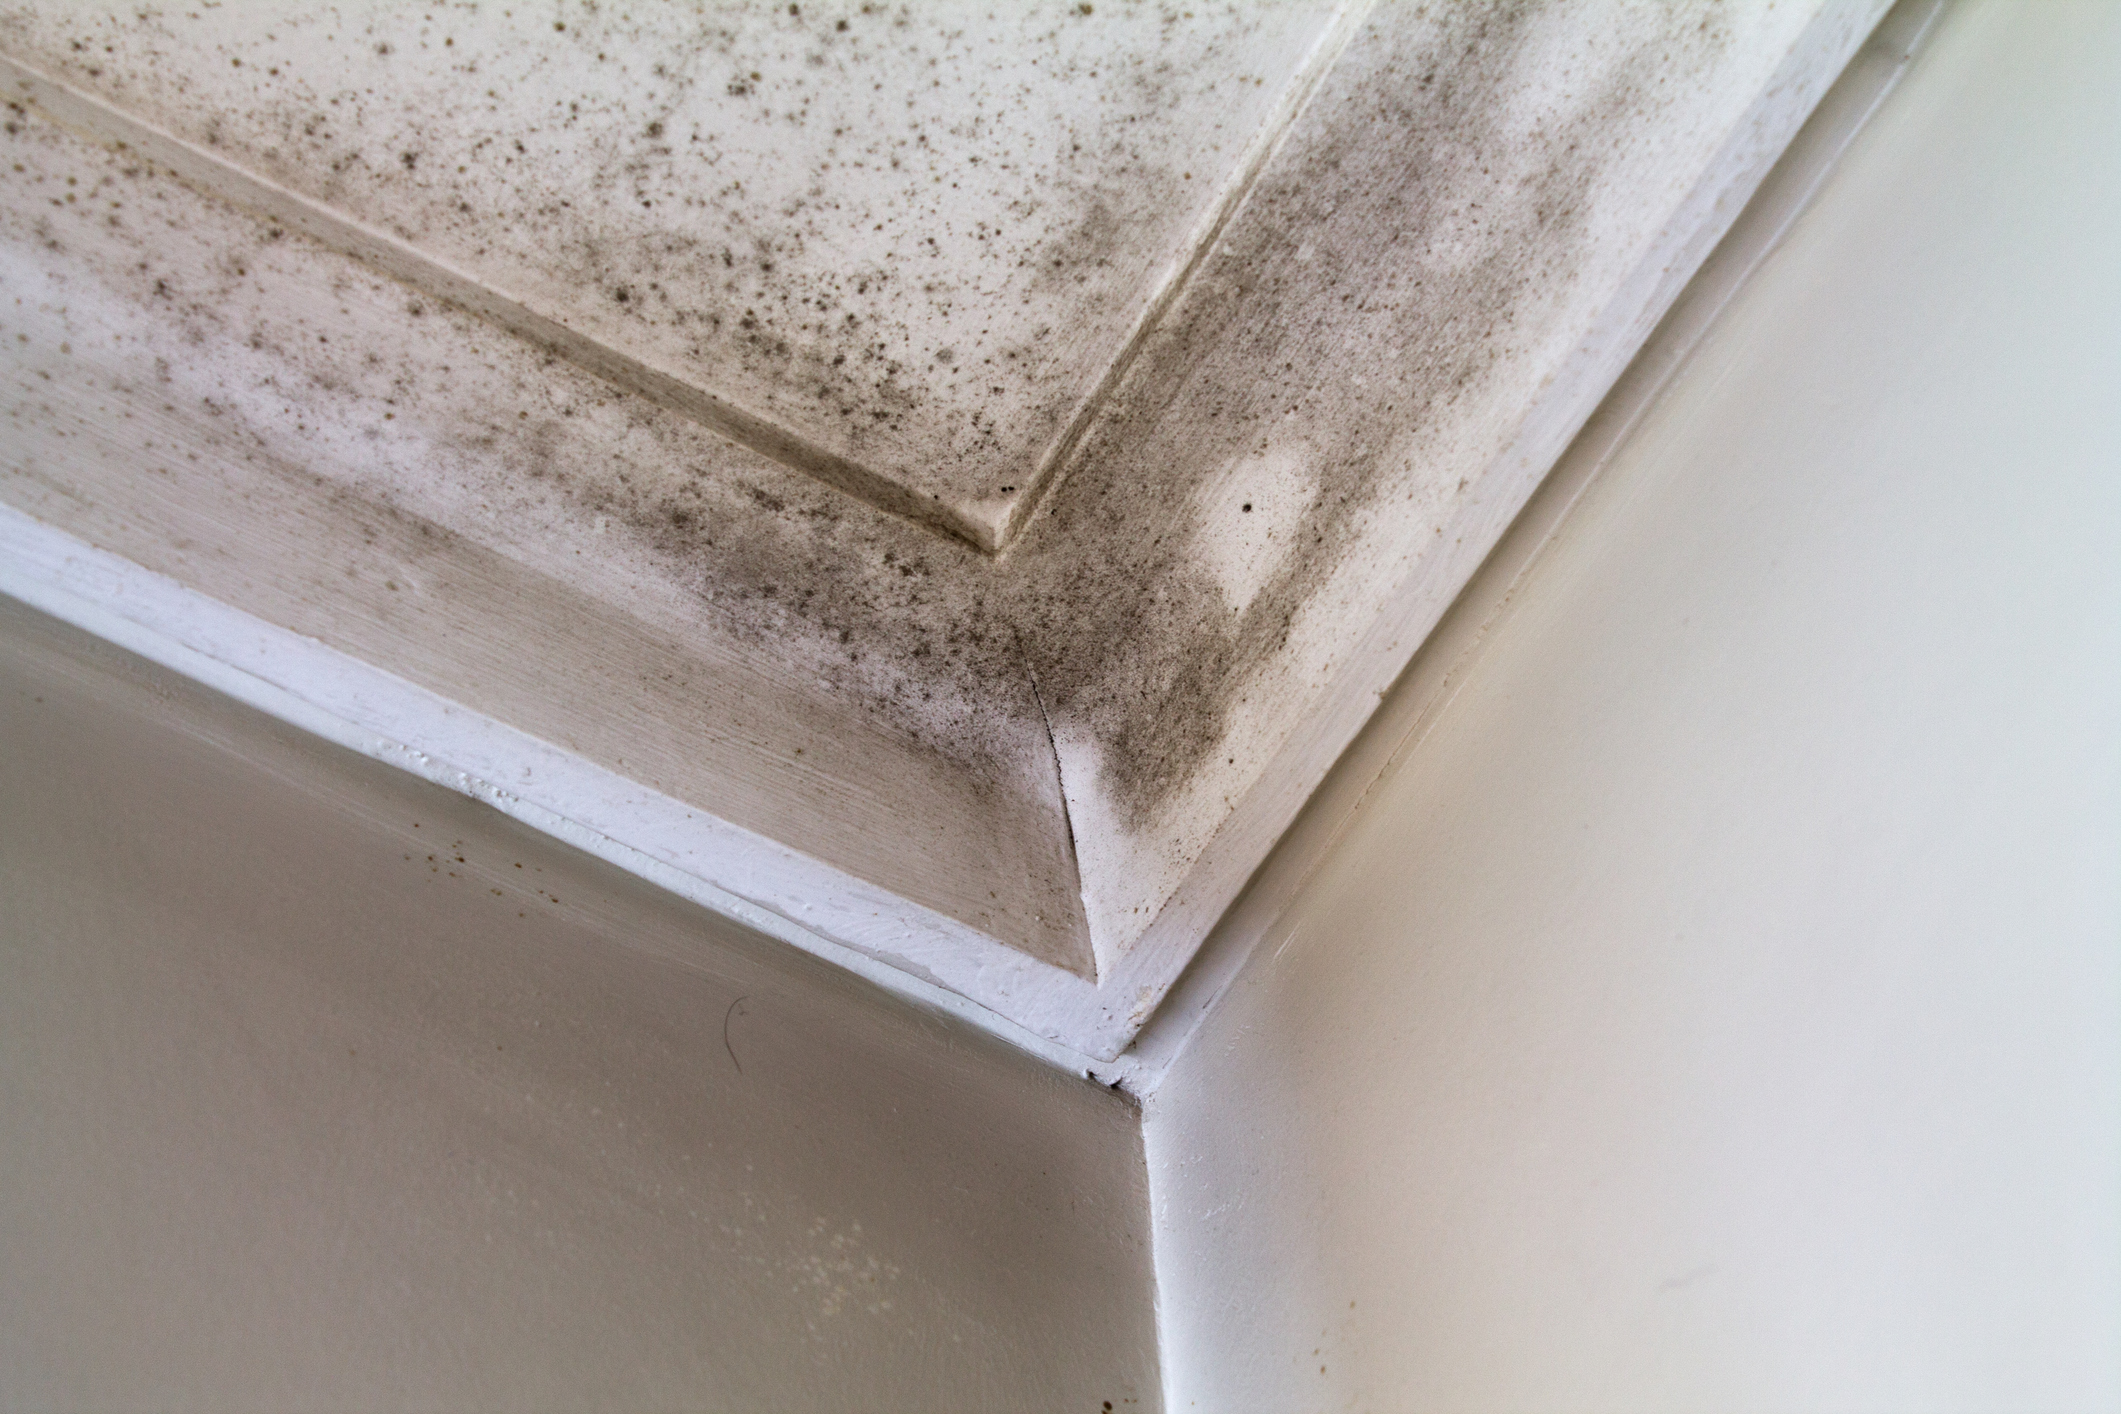 Mold in house